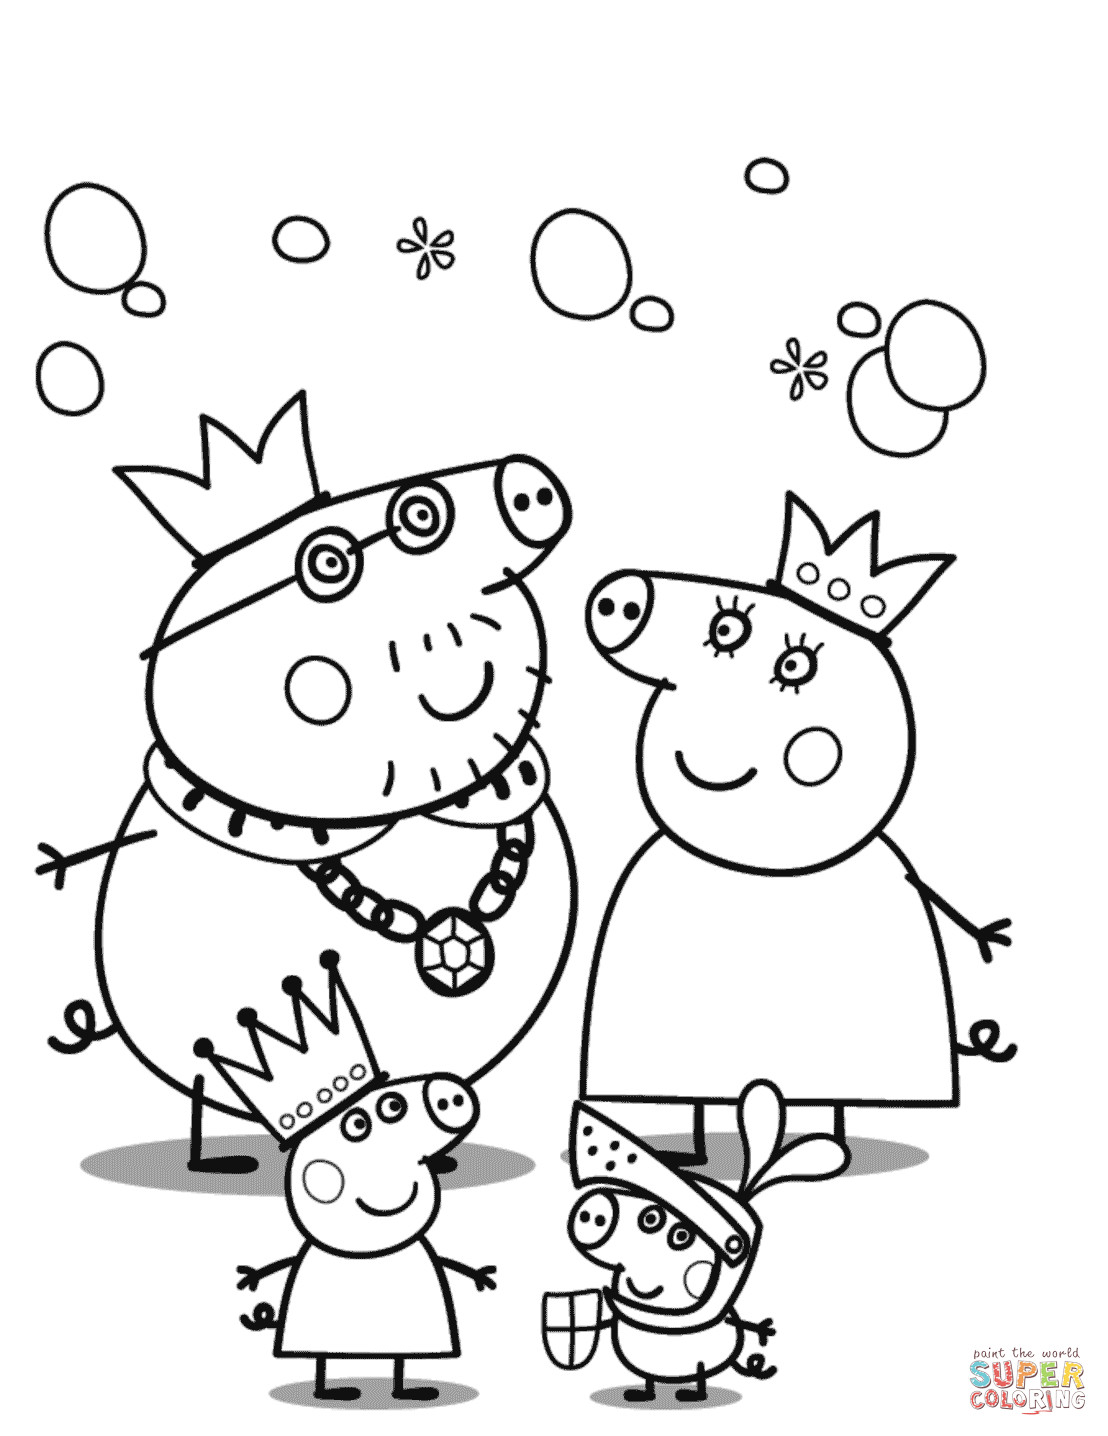 Free Printable Peppa Pig Coloring Pages
 Peppa Pig s Royal Family coloring page